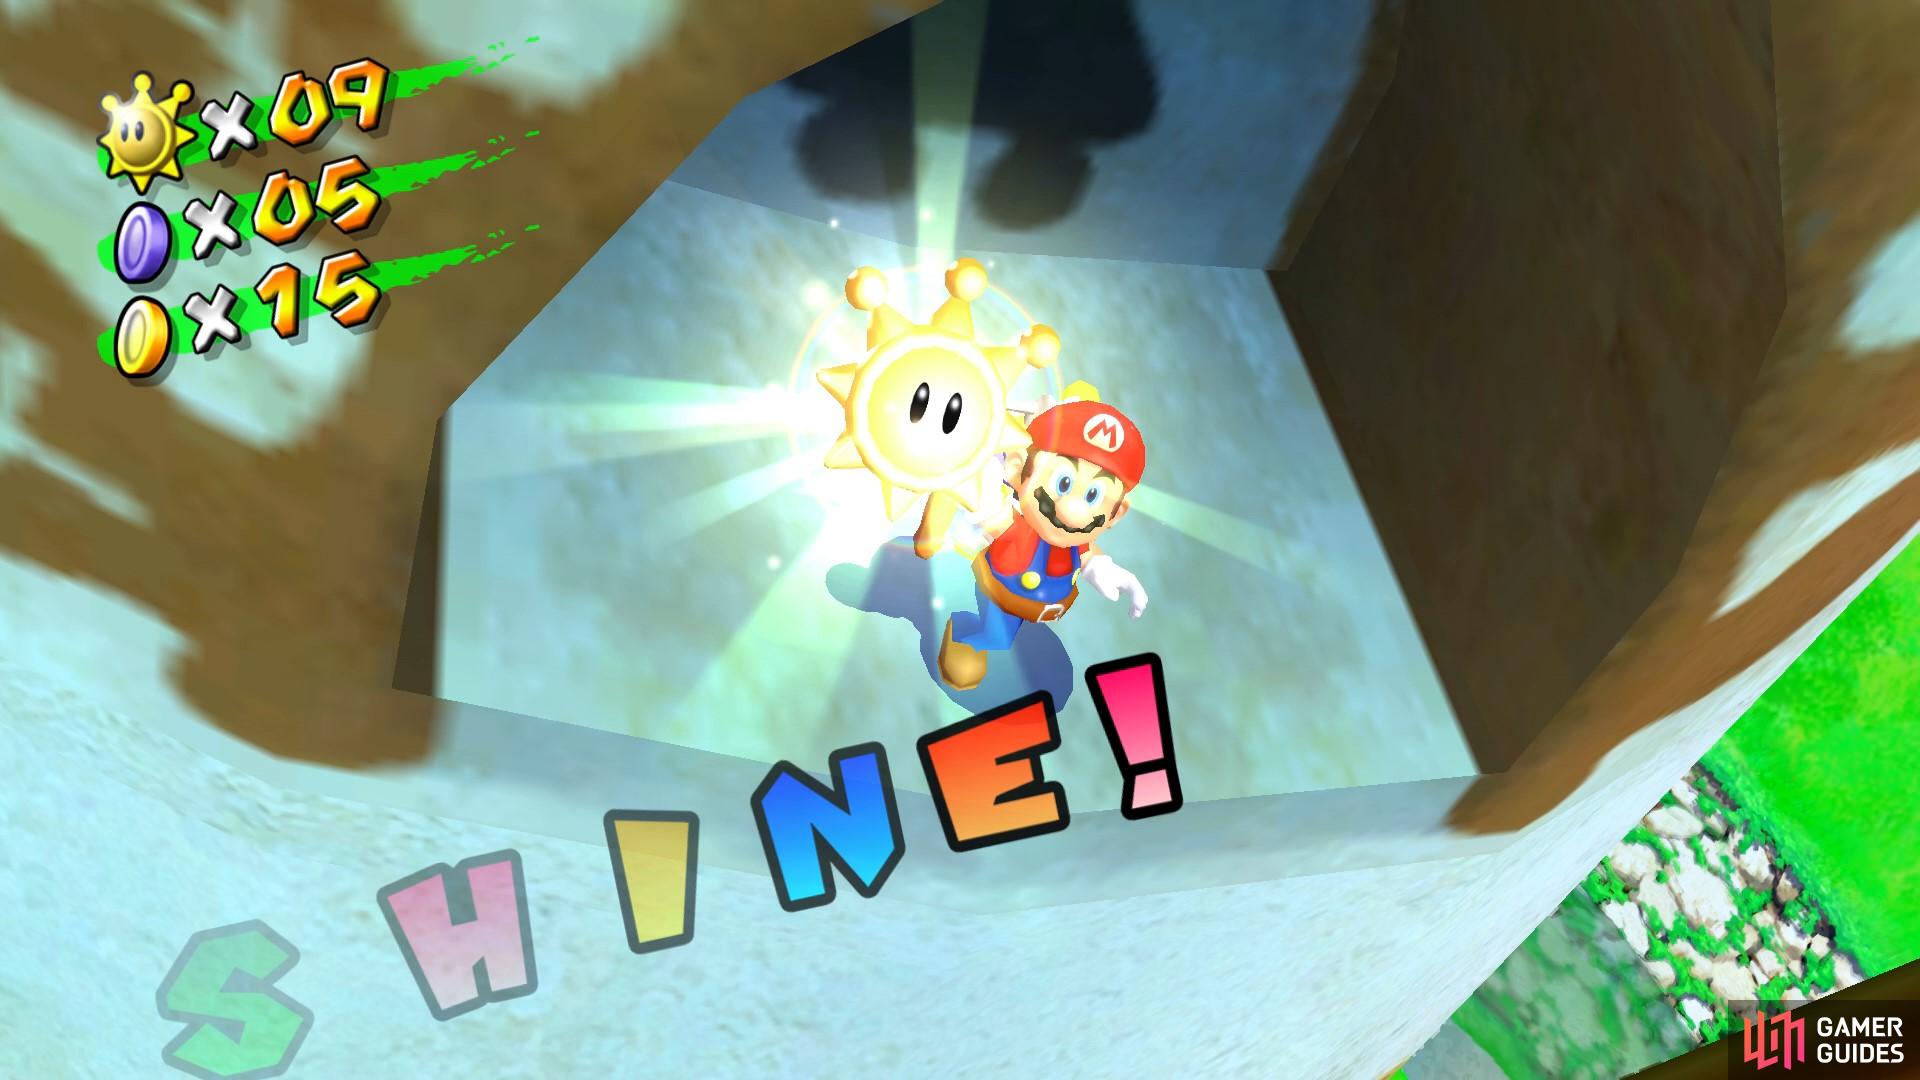 The Shine will spawn in an alcove in the Windmill!